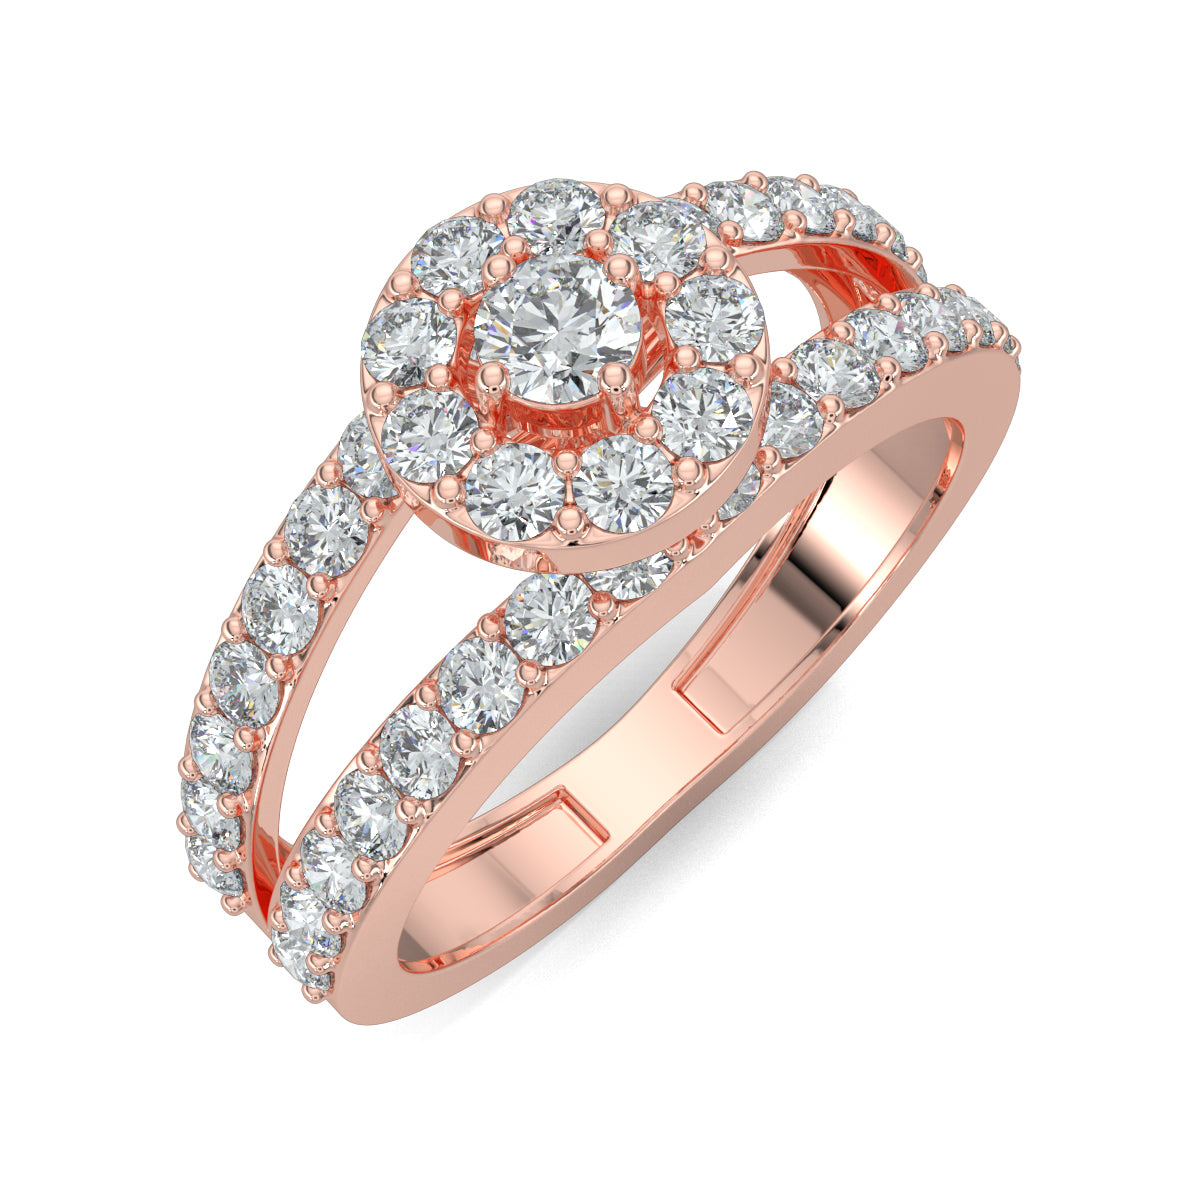 Rose Gold, Diamond Ring, Trillion cut, Timeless, Elegancec, Luxury Jewellery, Contemporary Flair, Sparkle, Daily Wear, Exquisite metals, Ocassion Jewellery